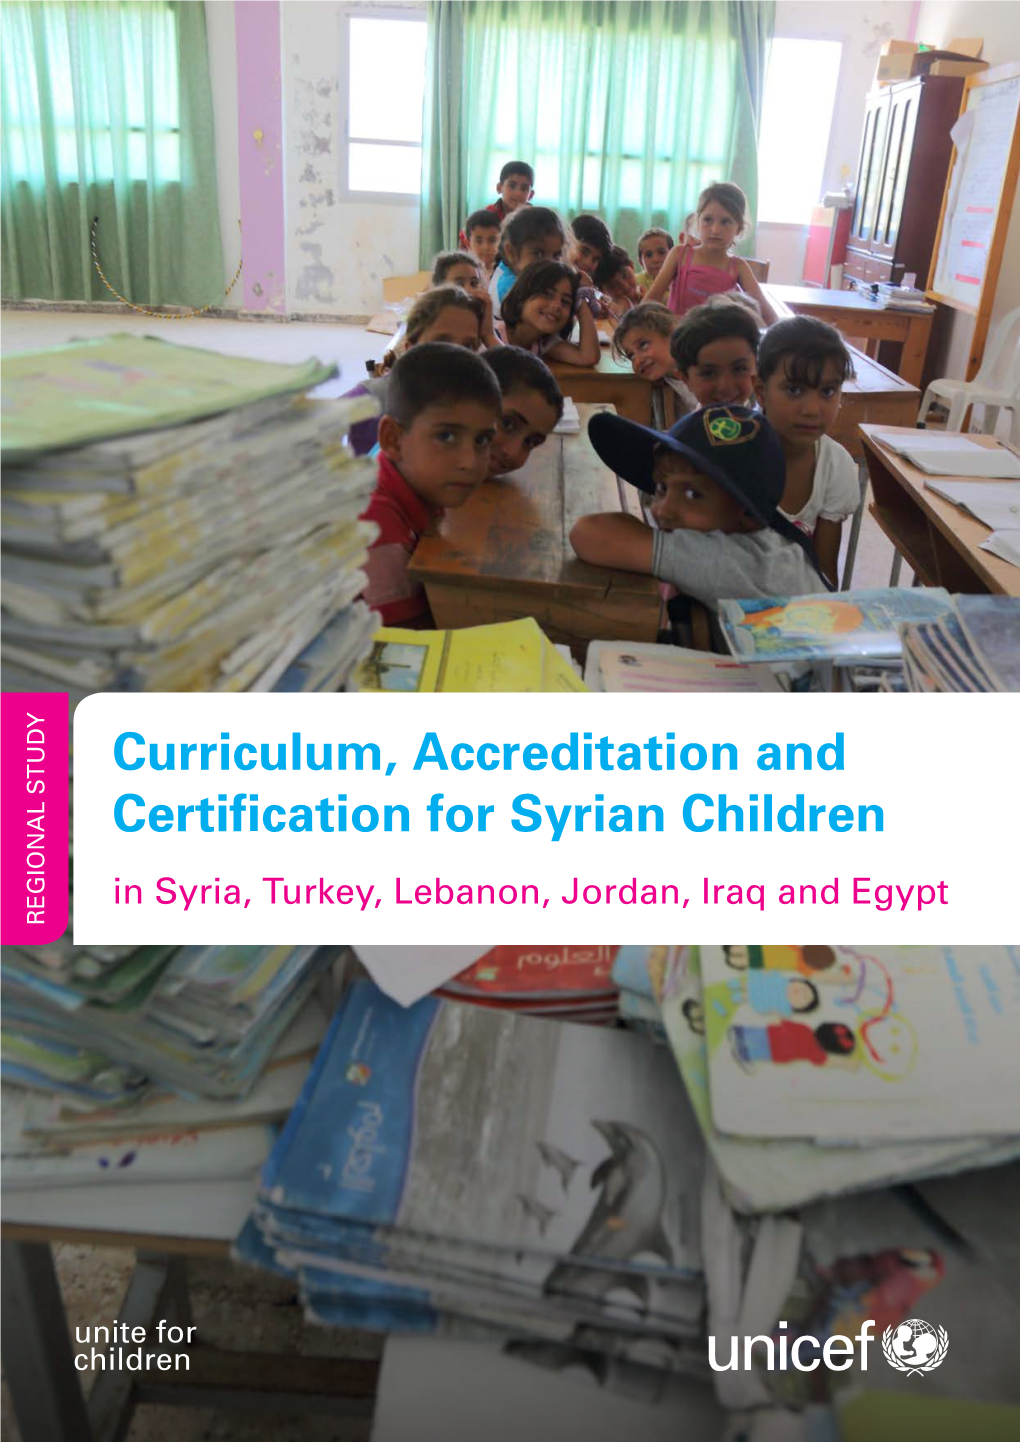 Curriculum, Accreditation and Certification for Syrian Children in Syria, Turkey, Lebanon, Jordan, Iraq and Egypt REGIONAL STUDY